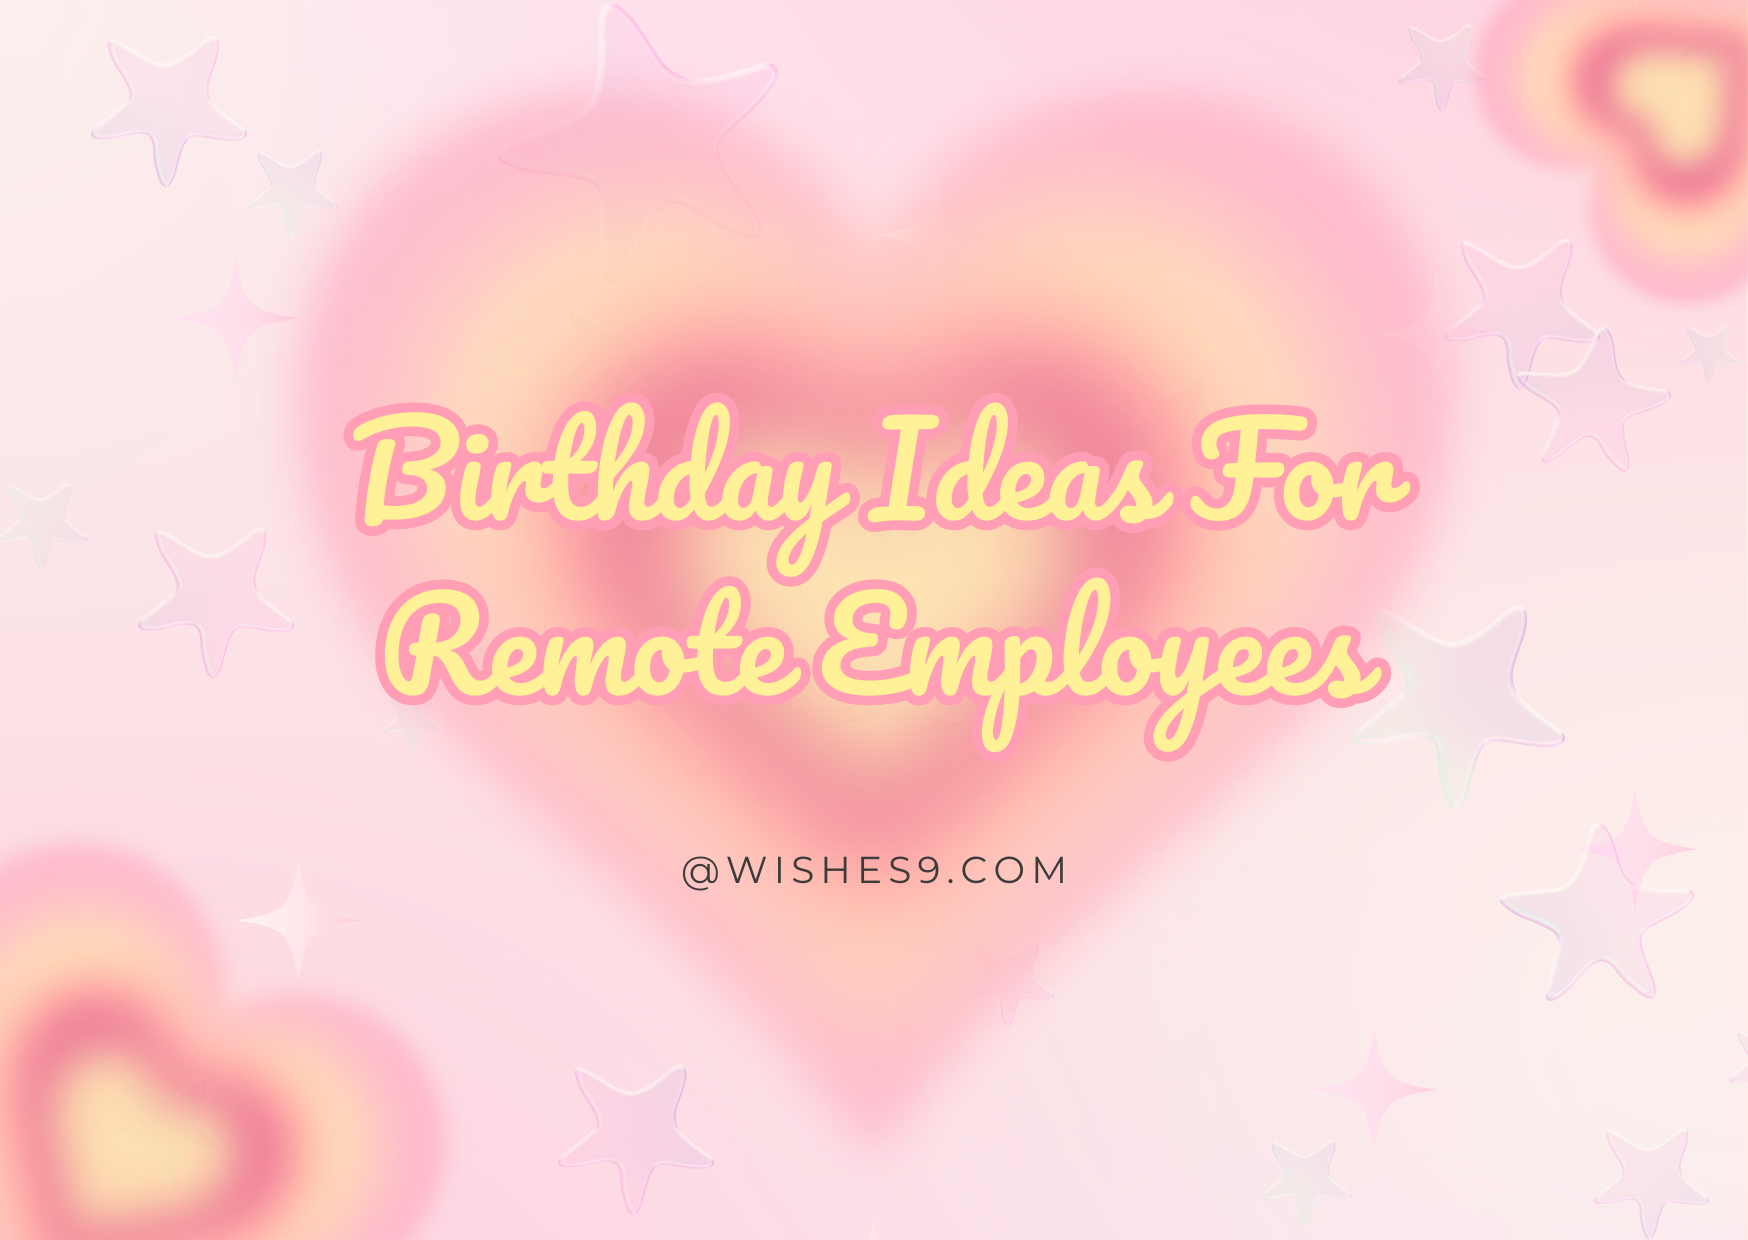 Birthday Ideas For Remote Employees